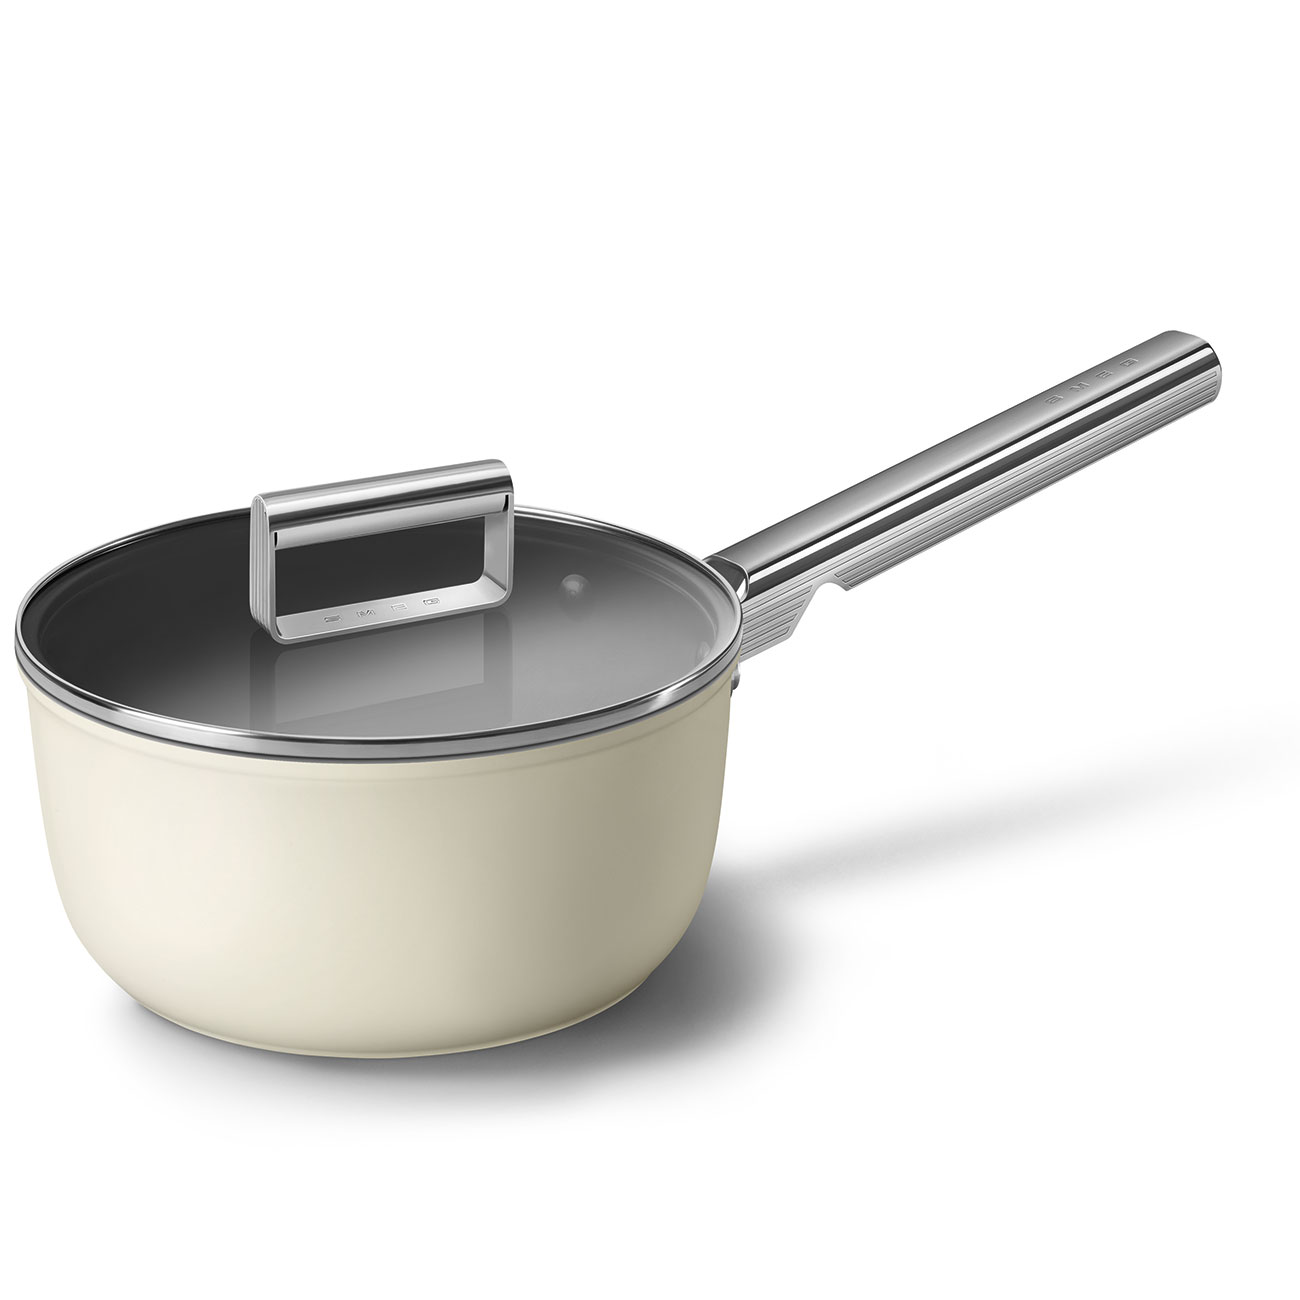 Smeg Cream Non-stick Saucepan with glass lid and stainless steel handle_7